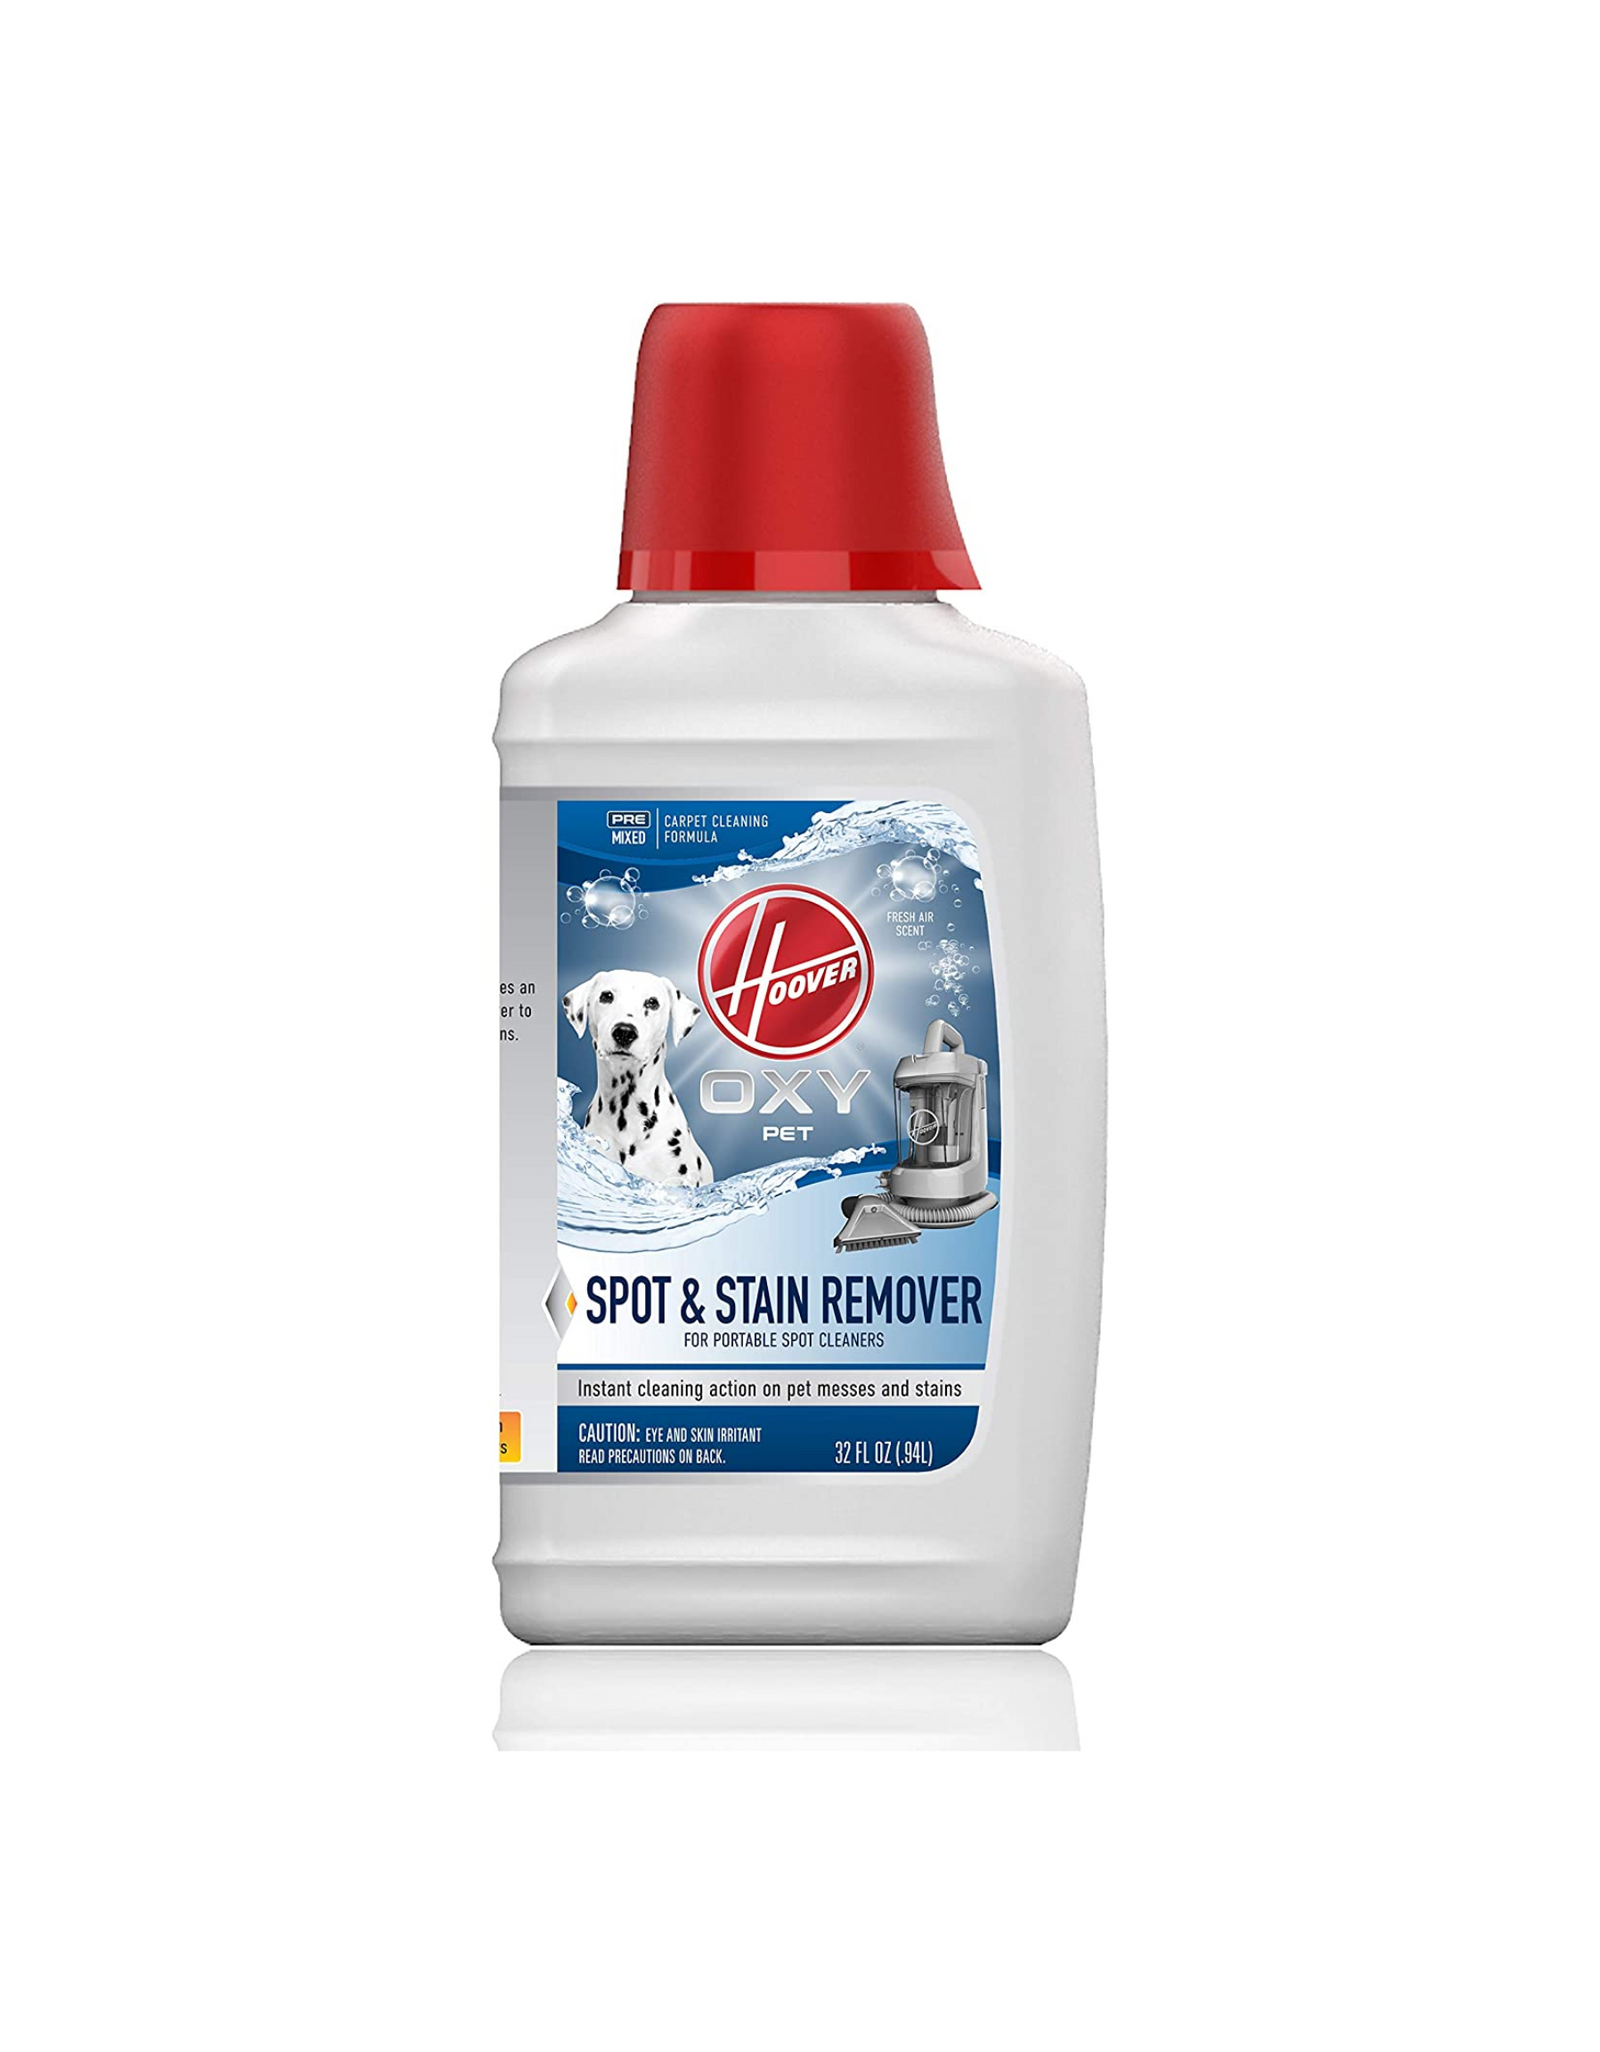 Hoover Oxy Premixed Spot Cleaner Solution AH30941, Spot & Stain Remover, 32 fl oz, White